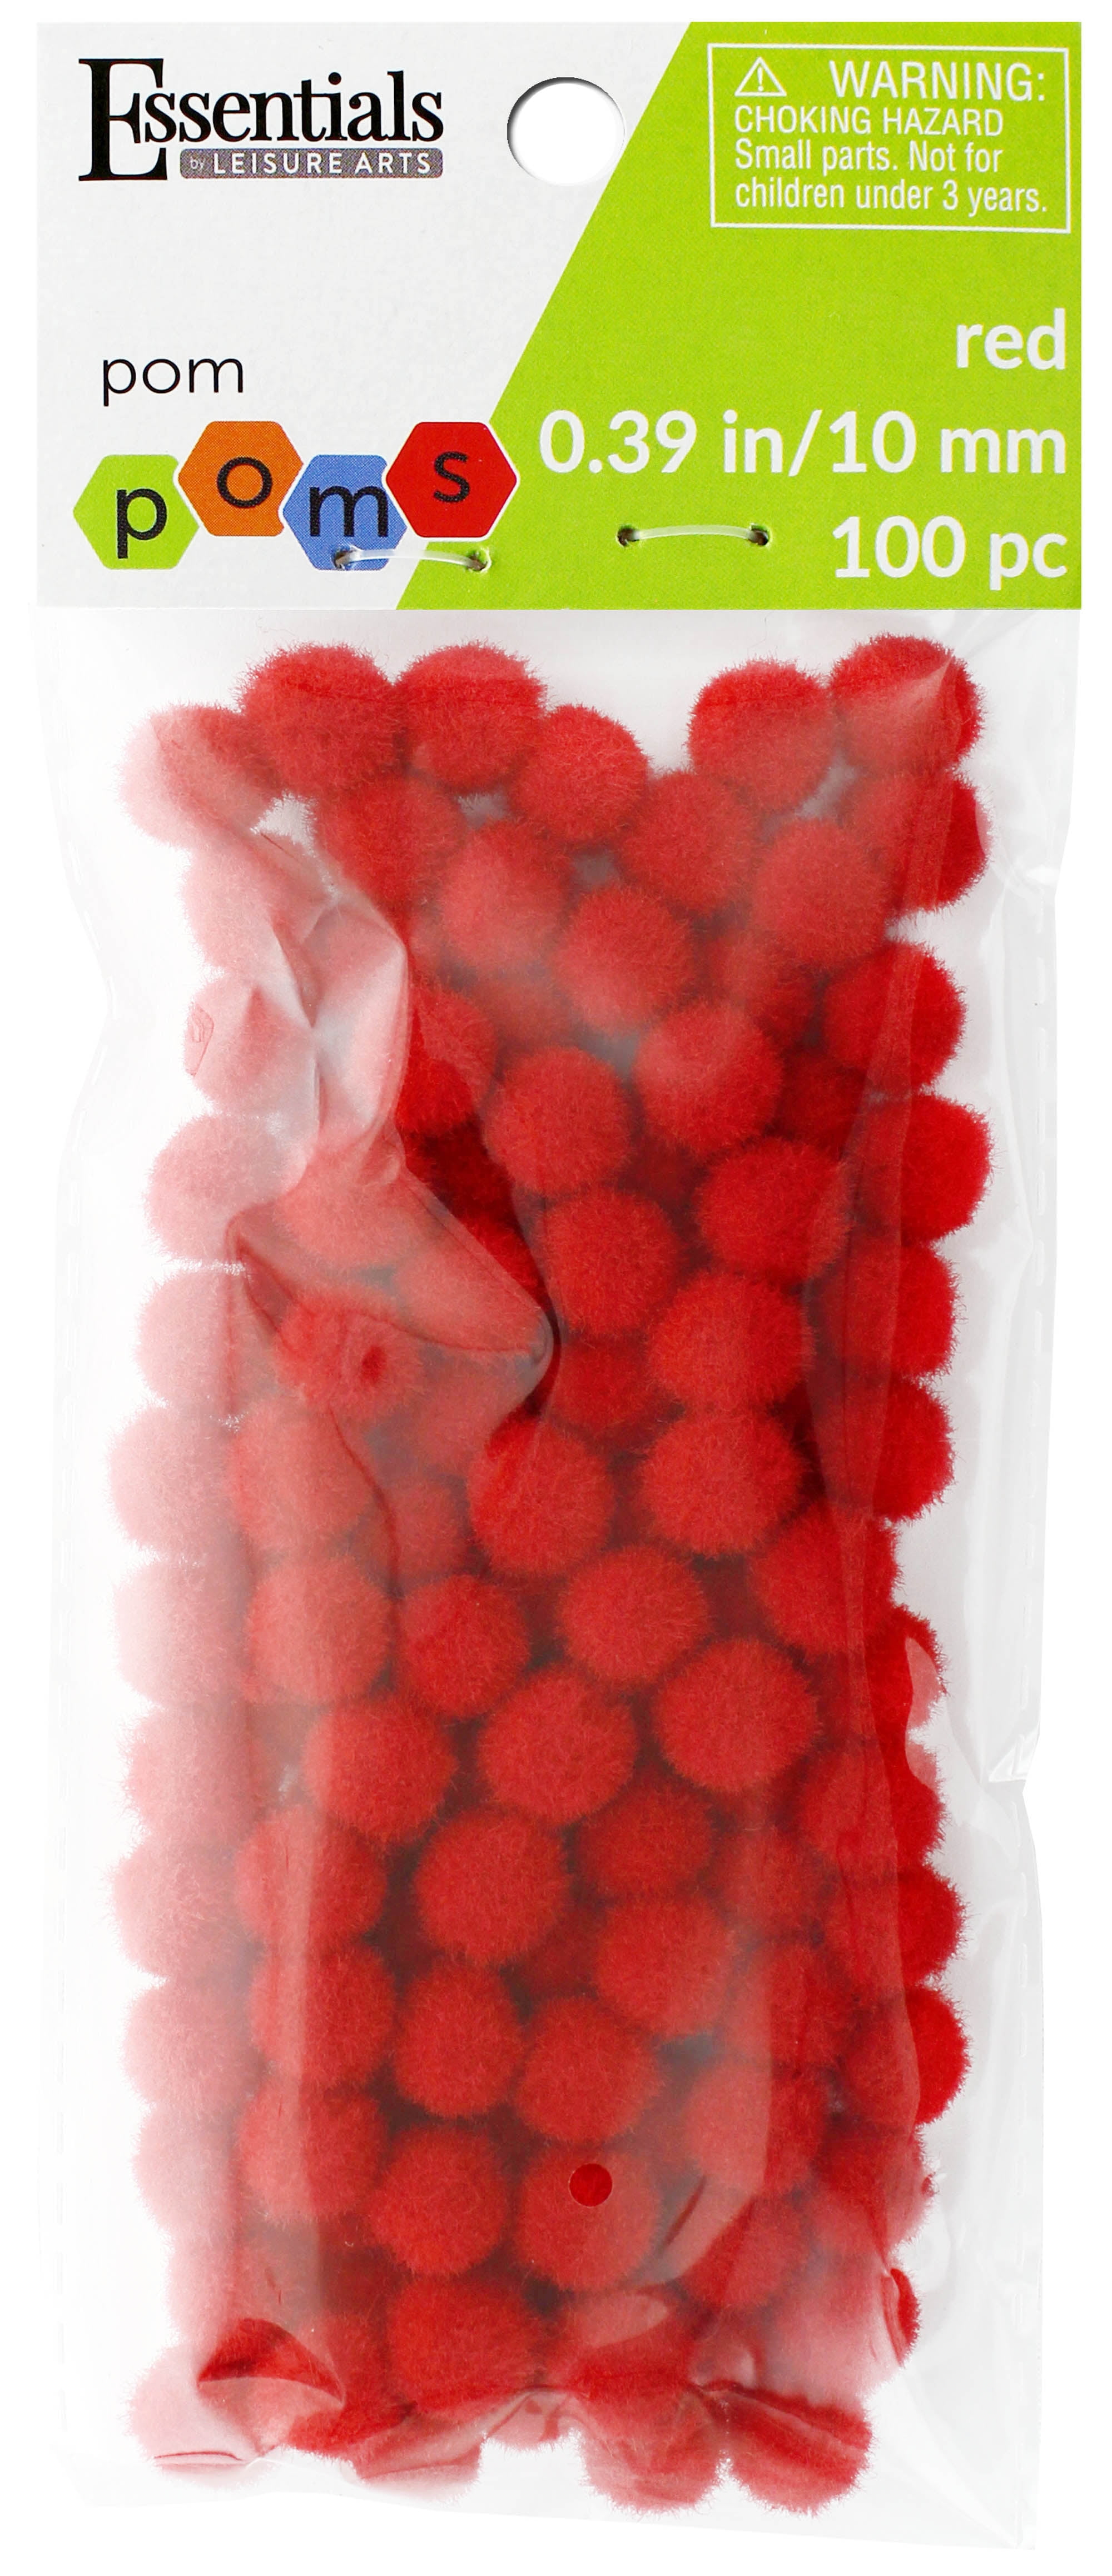 Essentials by Leisure Arts Pom Poms - Red - 3mm - 100 piece pom poms arts  and crafts - red pompoms for crafts - craft pom poms - puff balls for crafts